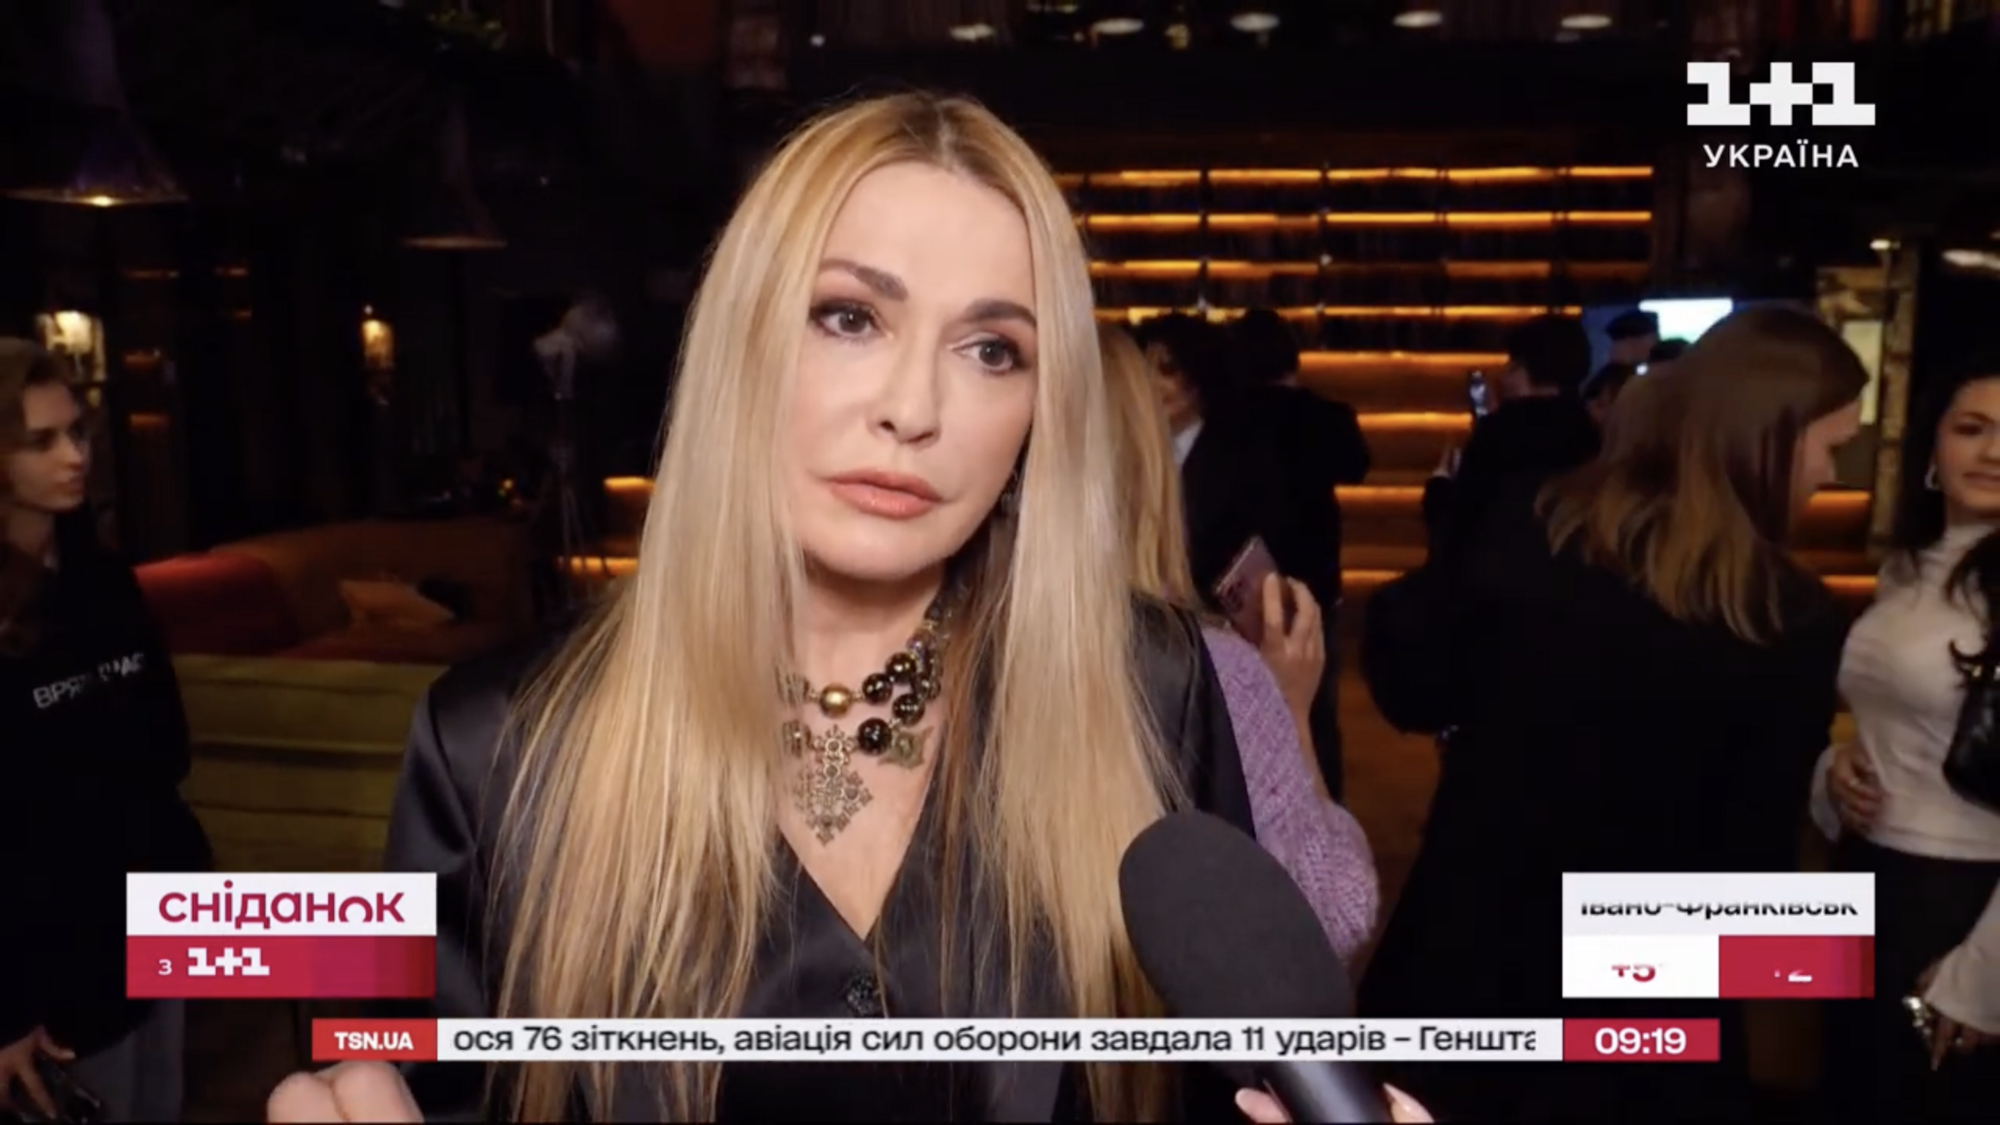 For the first time, Olha Sumska commented on the scandal surrounding her daughter, who lives in Russia and earns ''bloody rubles'' there